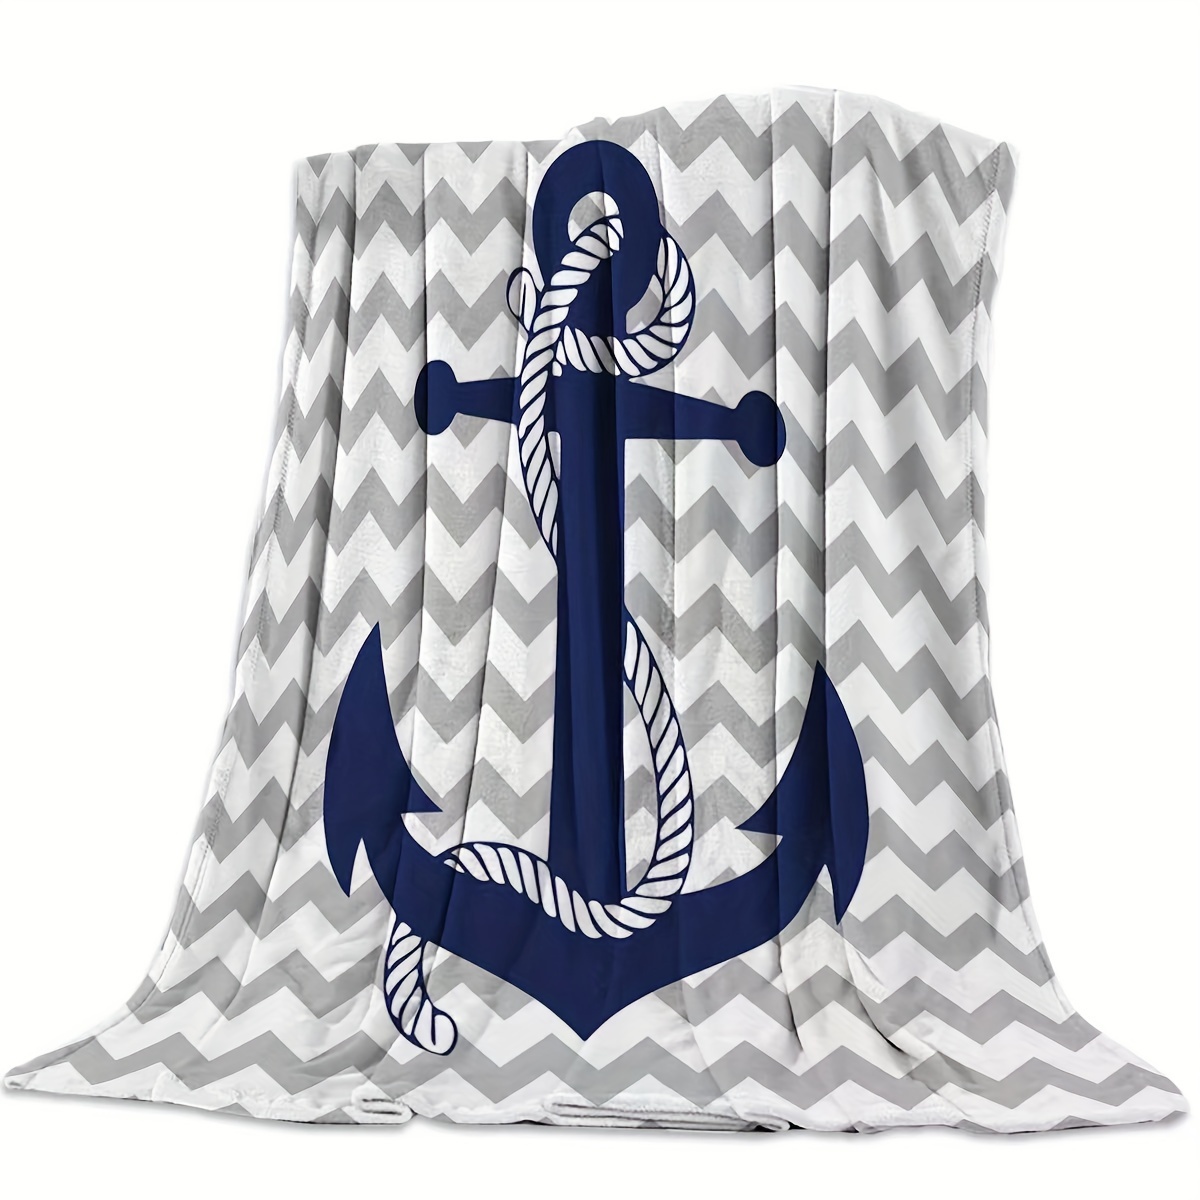 

Ultra-soft Flannel Throw Blanket - Nautical Navy Blue Anchor With Gray & White, Cozy Plush For Sofa/bed, Stain-resistant, All-season Comfort